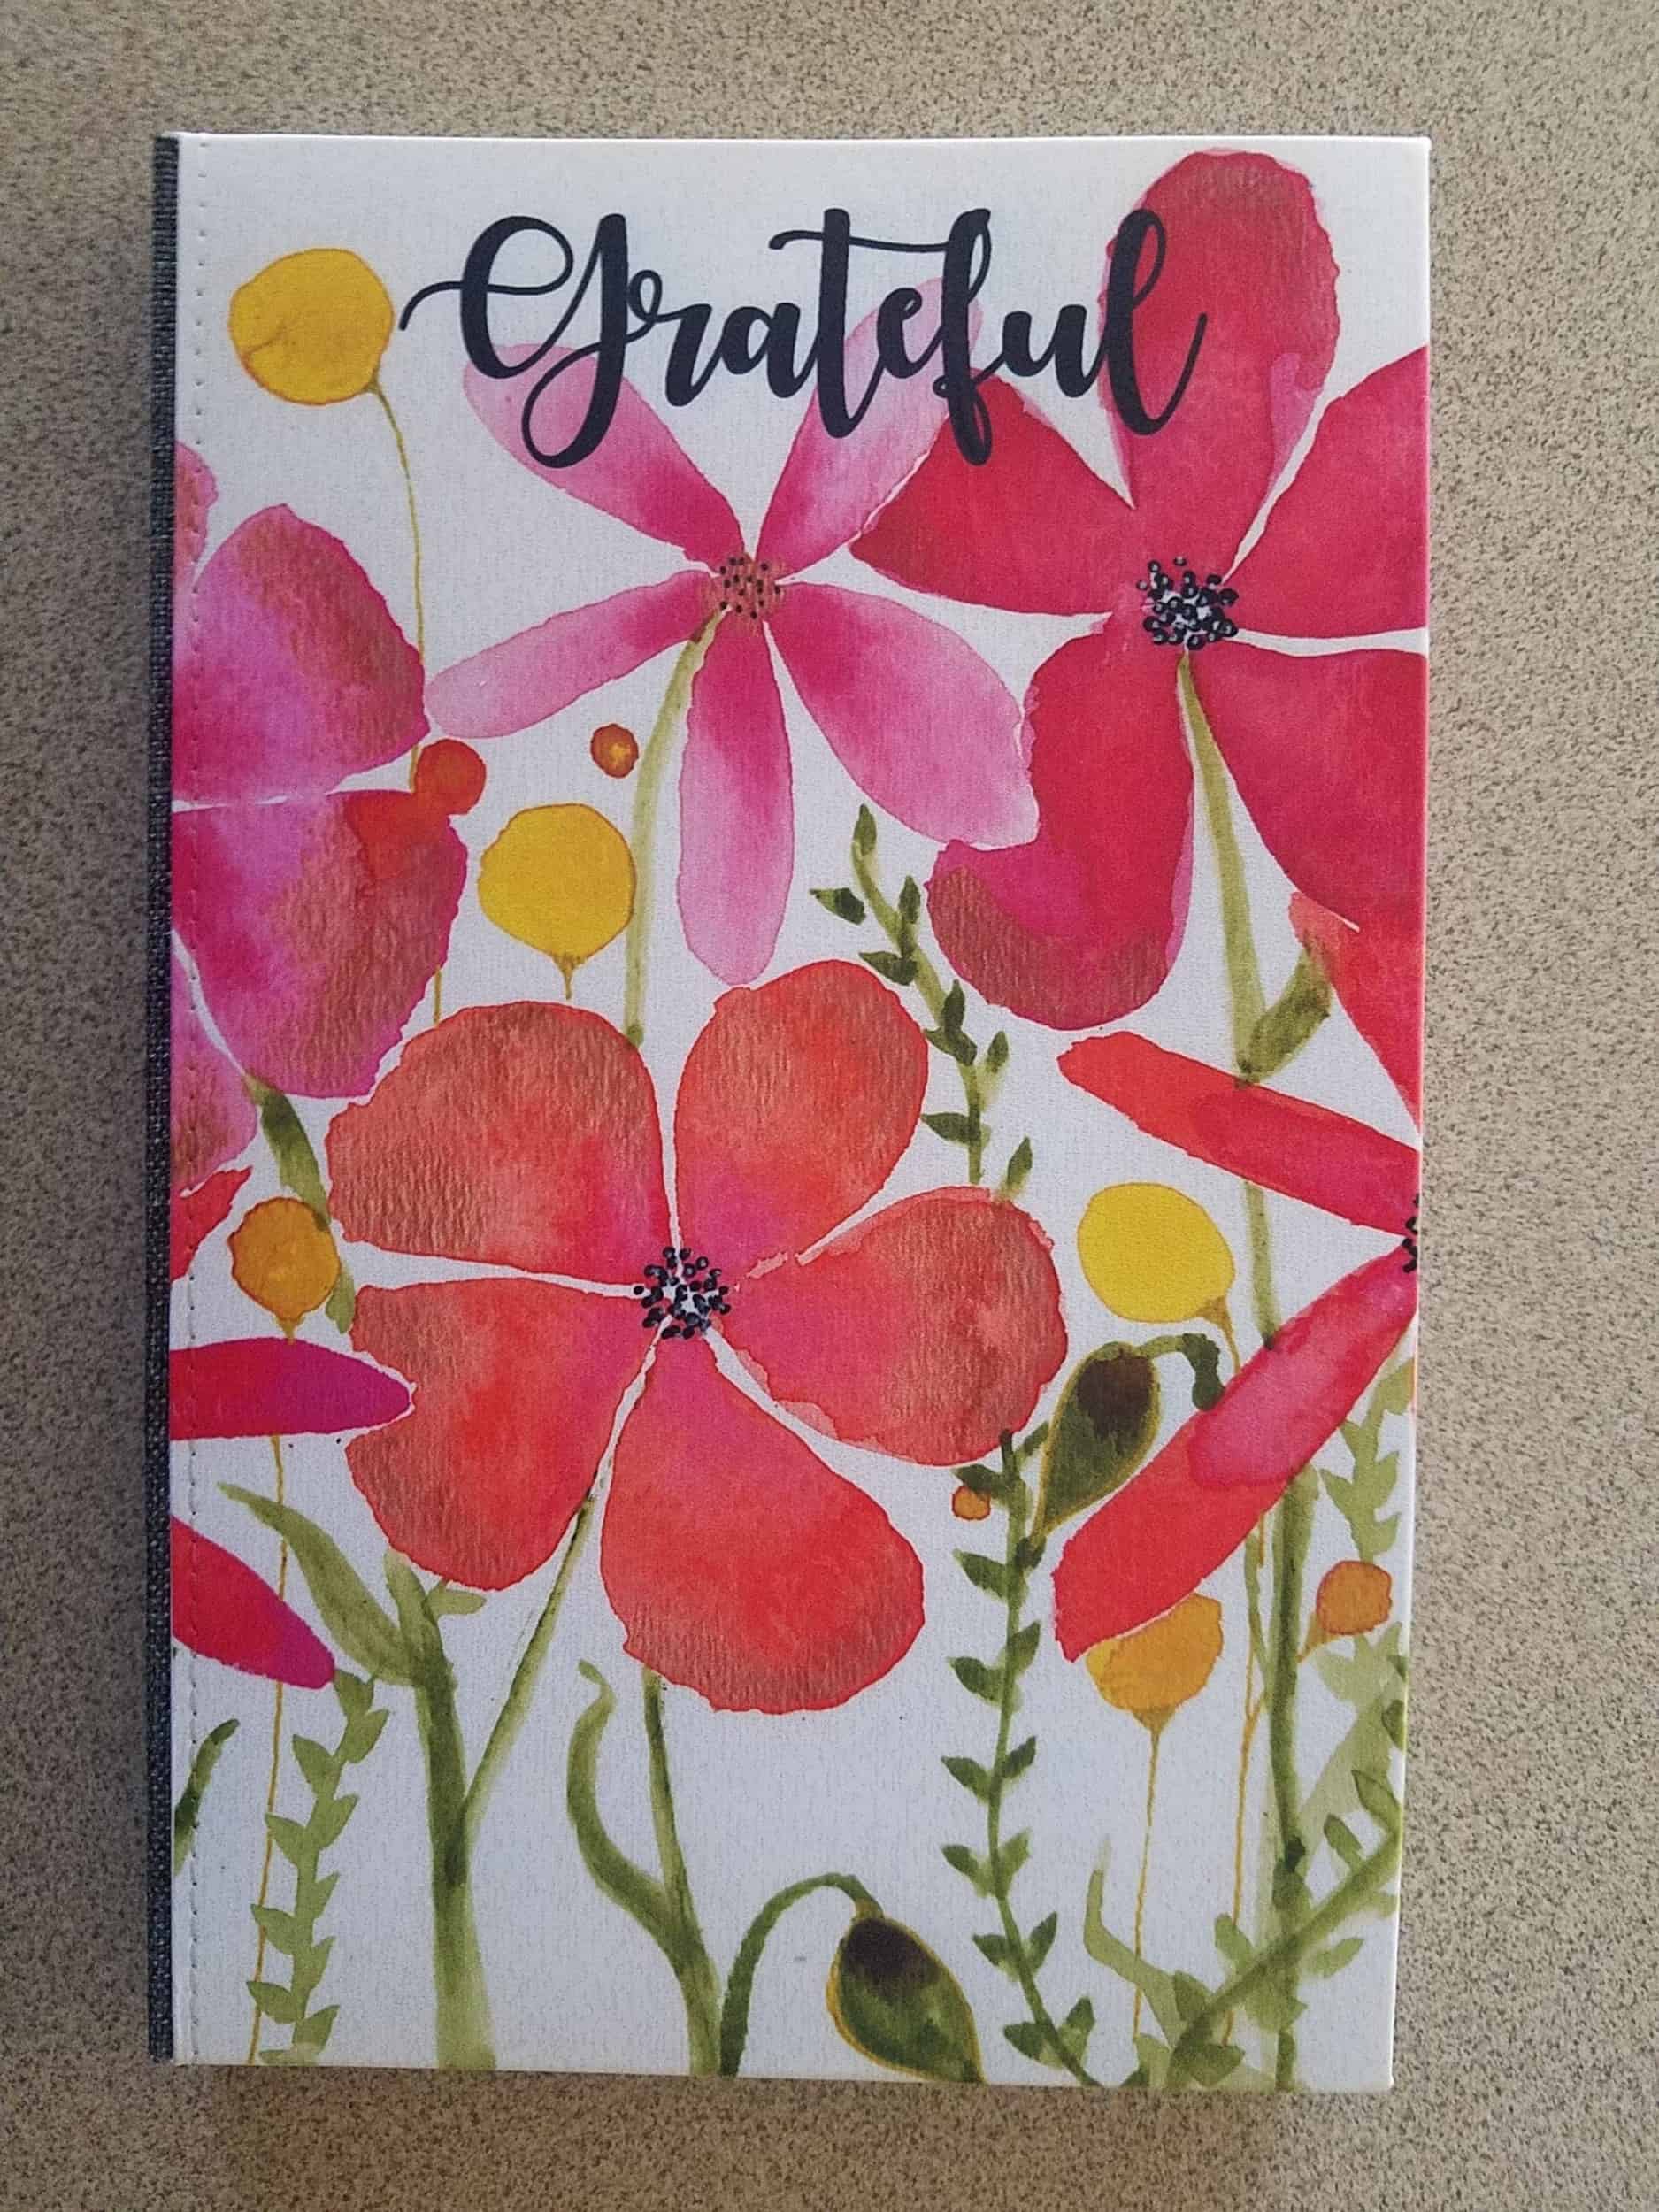 This "Grateful" Journal & Mug set is made with love by Studio Patty D! Shop more unique gift ideas today with Spots Initiatives, the best way to support creators.